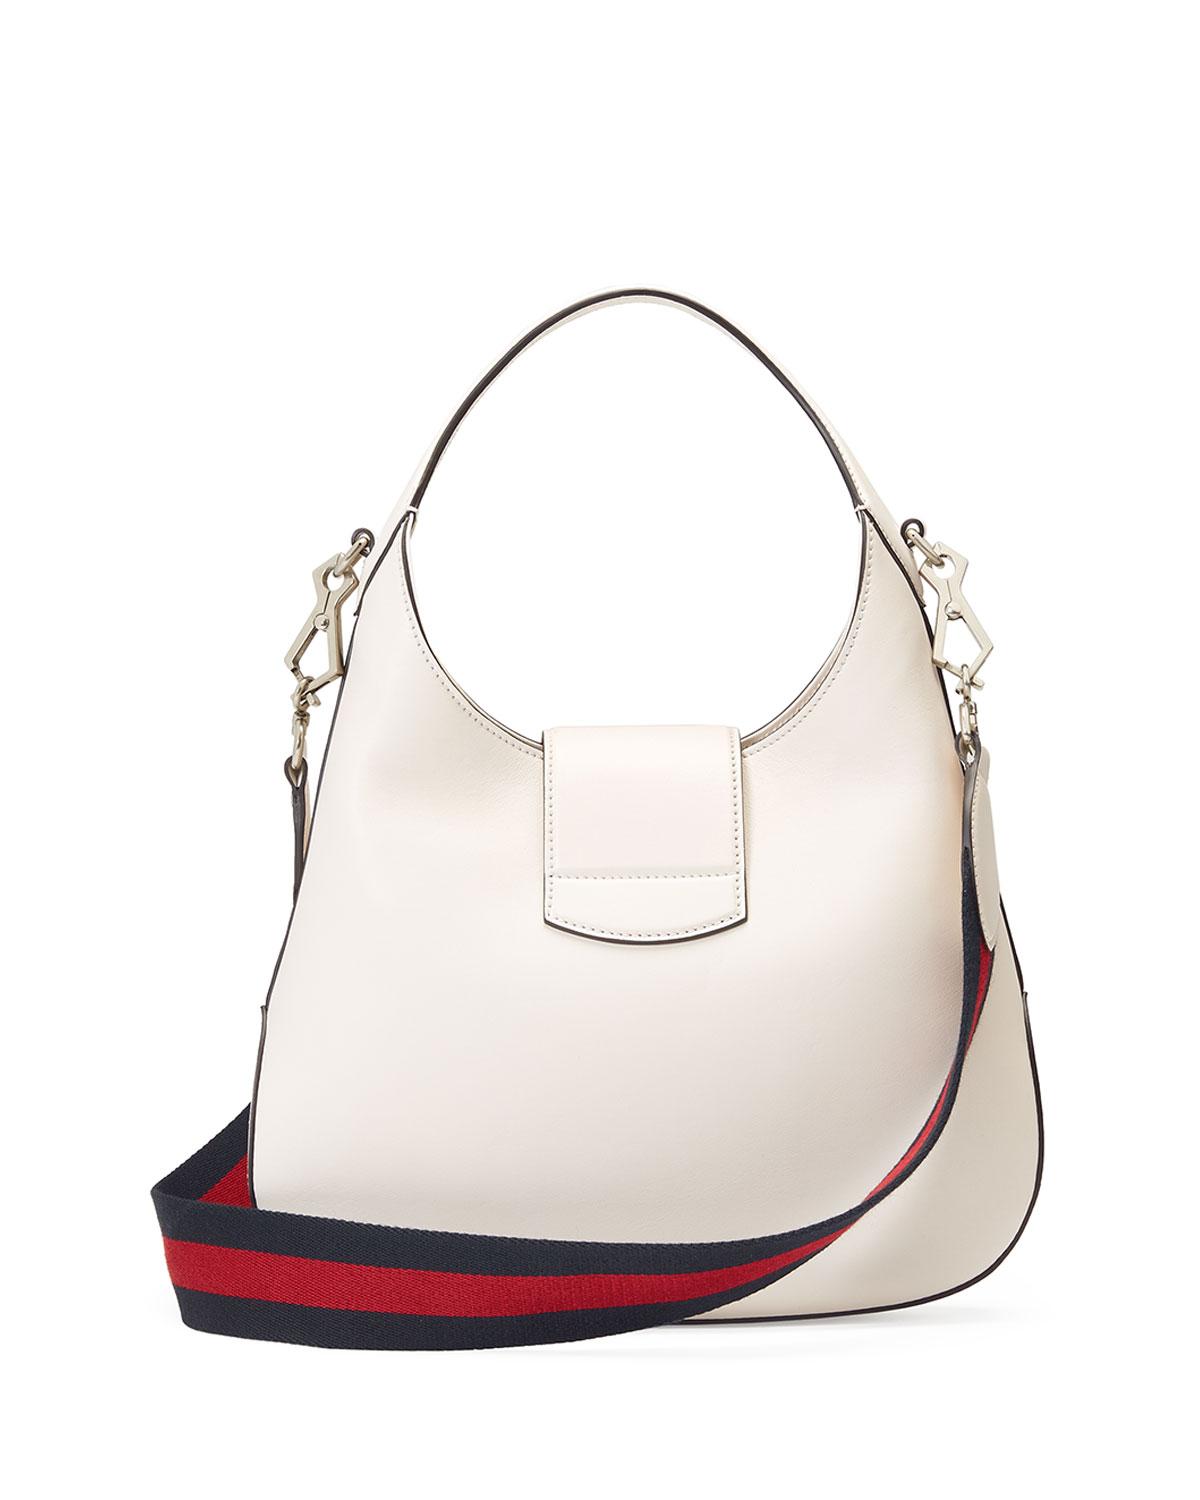 Gucci Dionysus Small Striped Leather Hobo Bag in White - Lyst